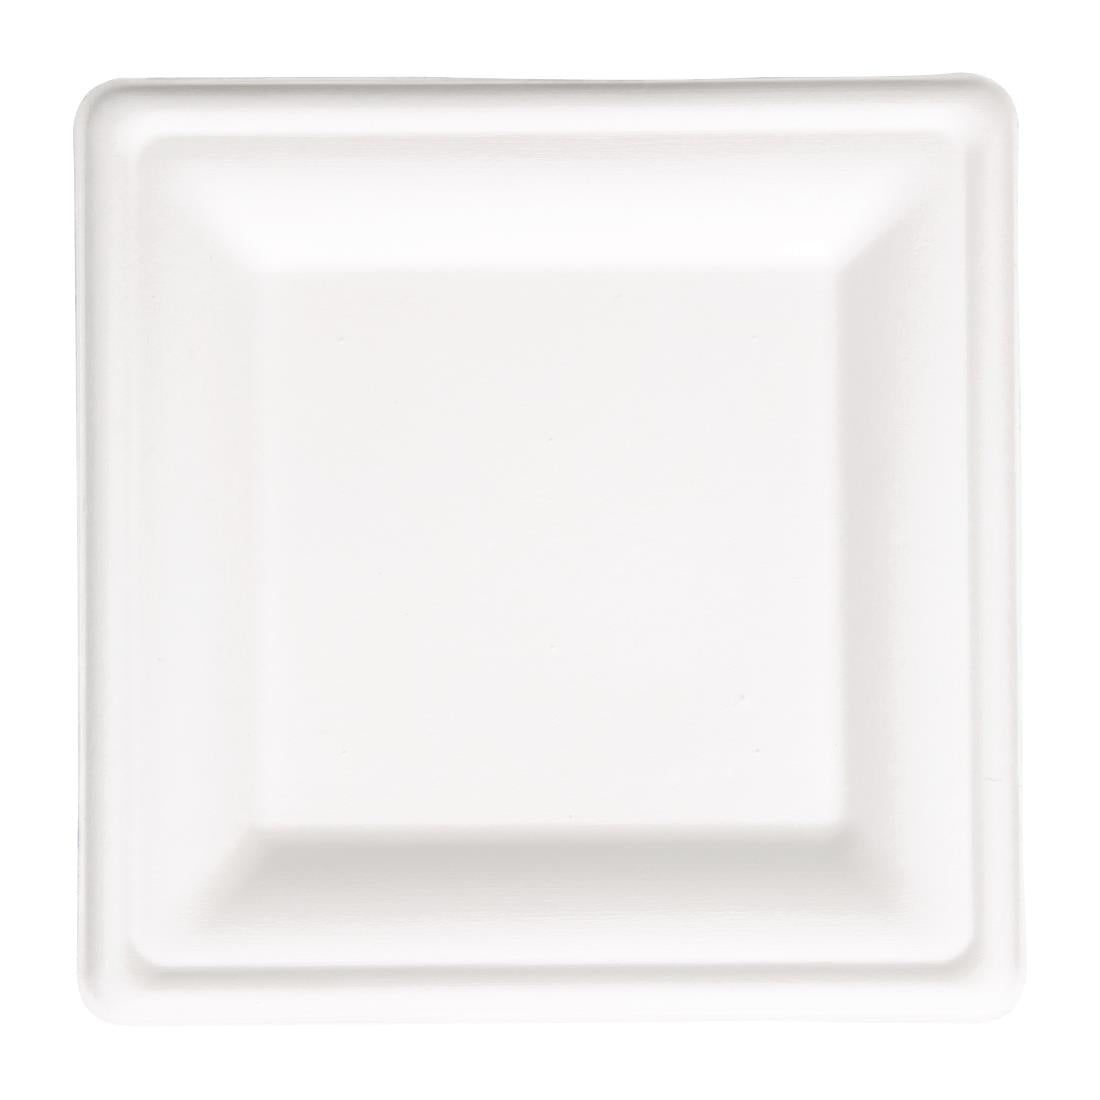 FC519 Fiesta Compostable Bagasse Square Plates 204mm (Pack of 50) JD Catering Equipment Solutions Ltd